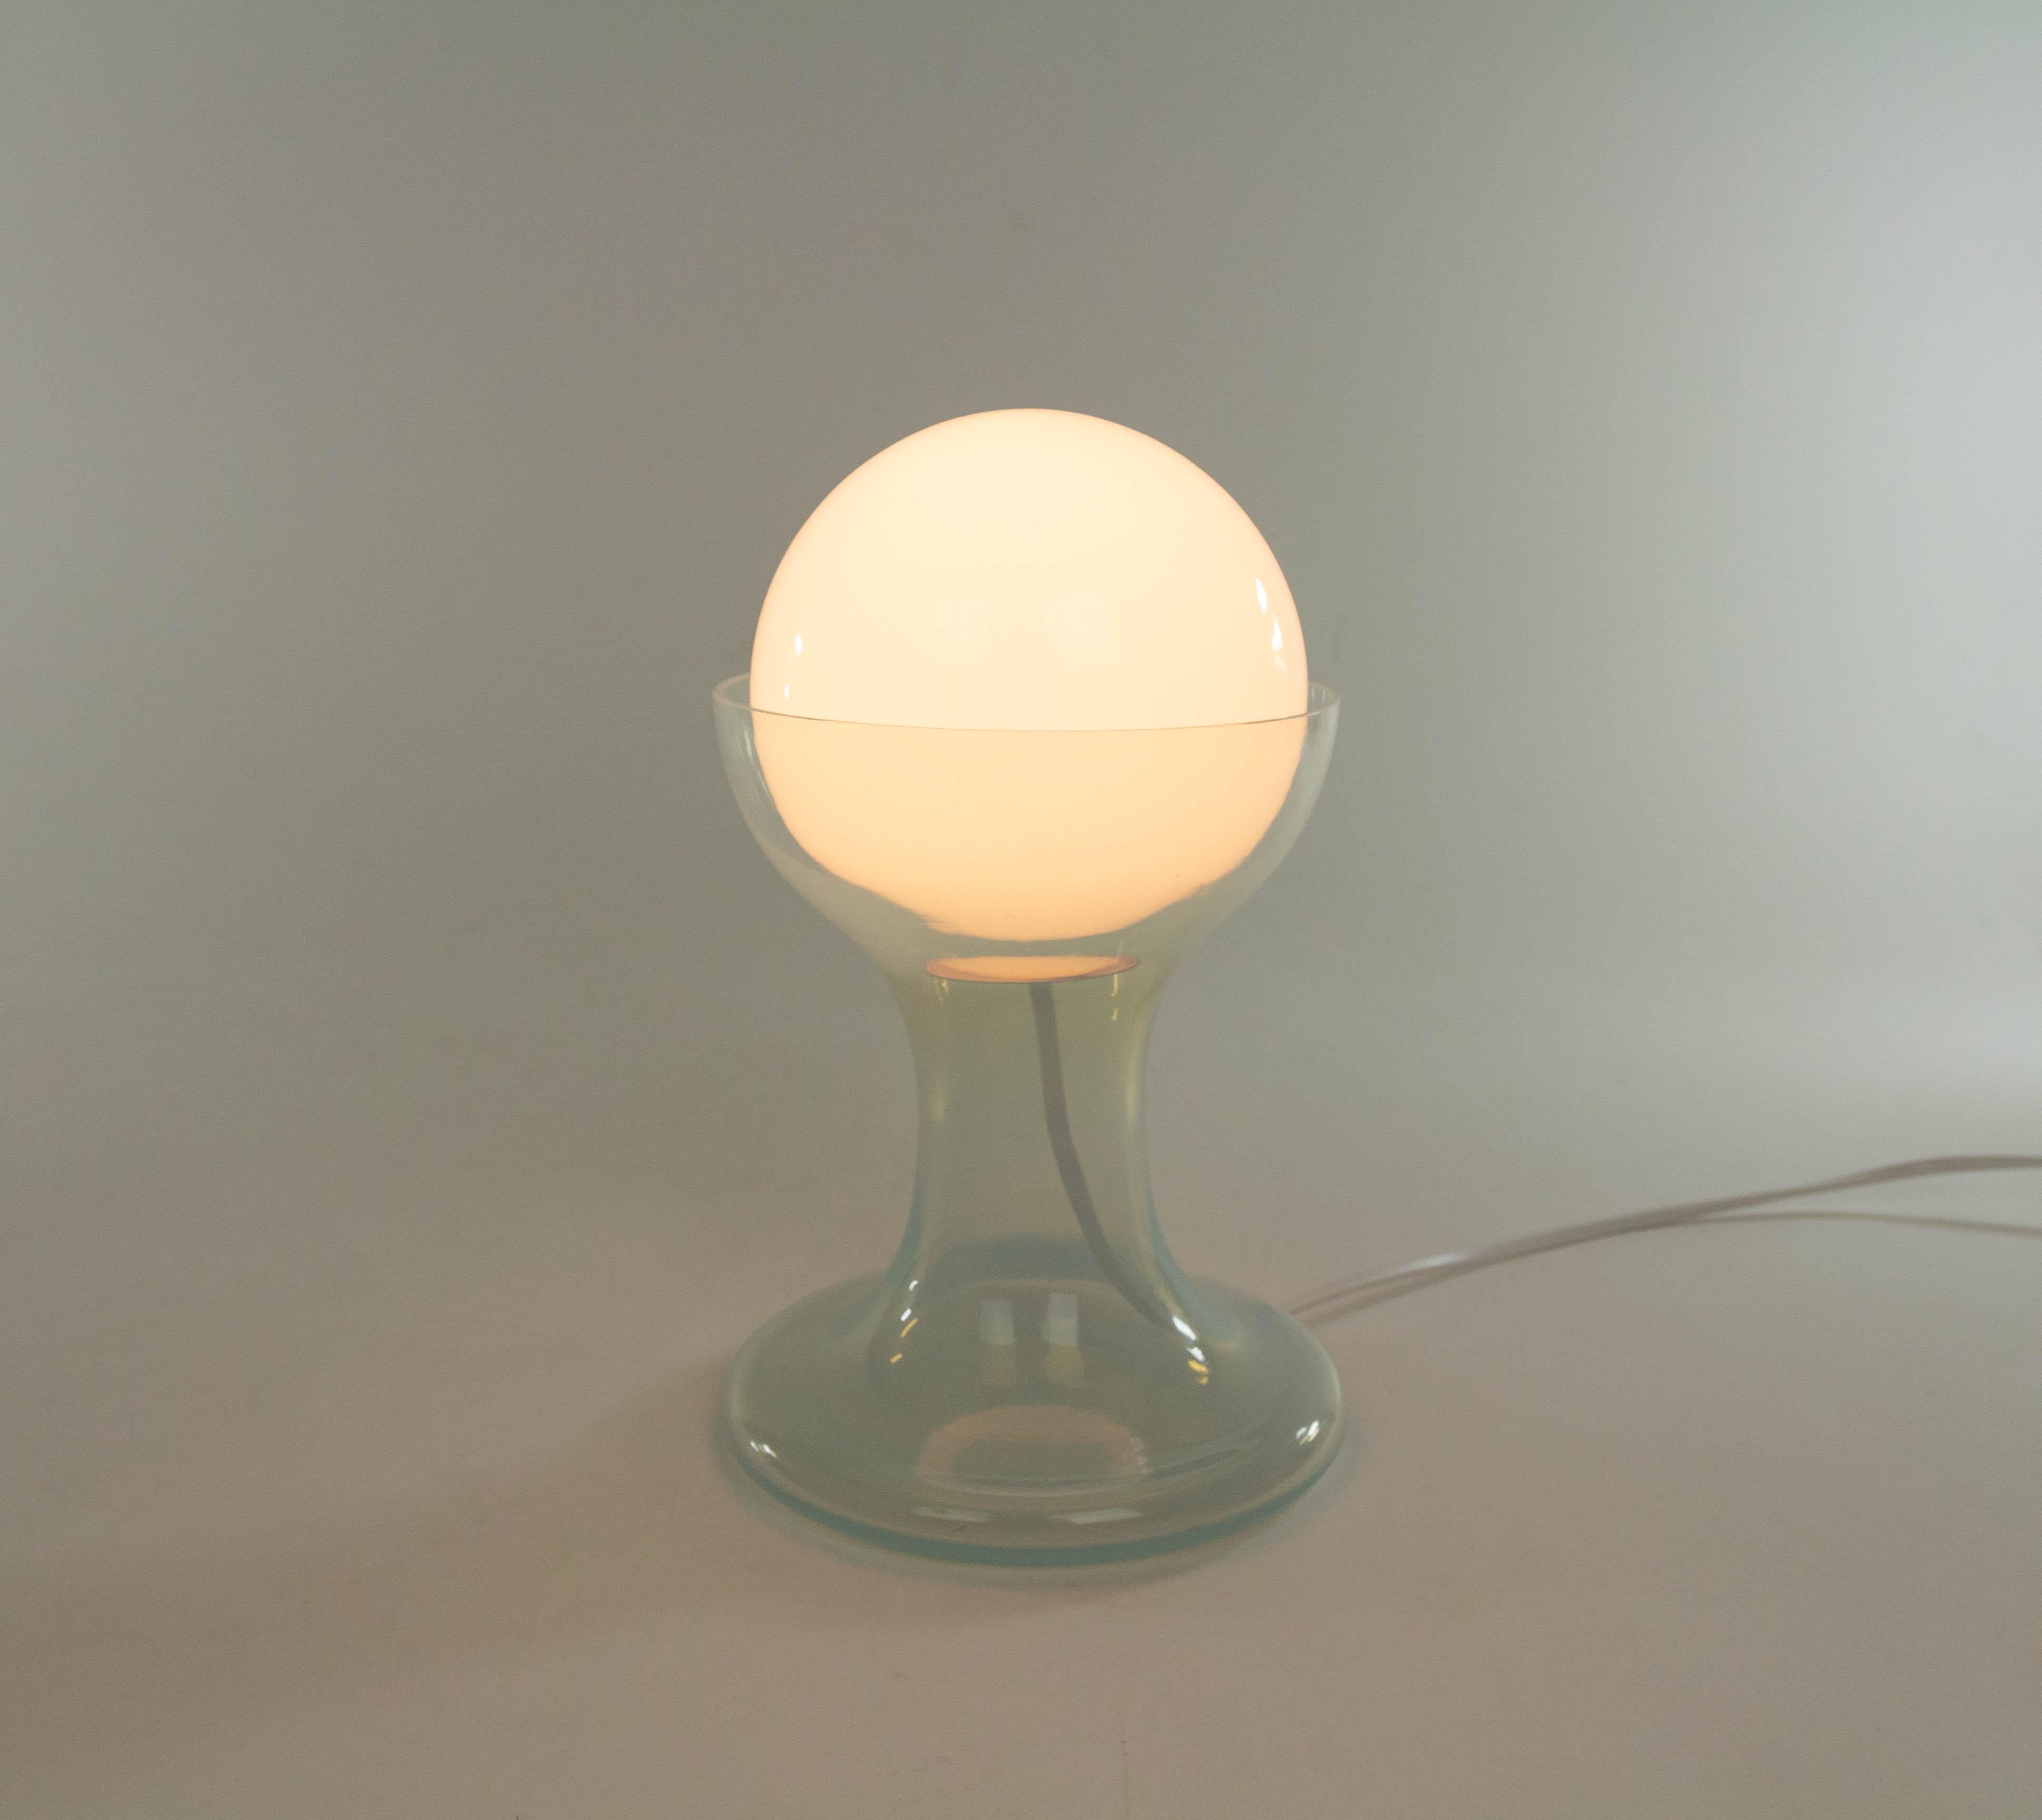 LT 215 table lamp designed by Carlo Nason and manufactured in the 1960s by Murano glassmaker A.V. Mazzega. The lamp is made of a white glass globe and a Murano glass base.

This model was produced in two sizes; this is the smaller version with a